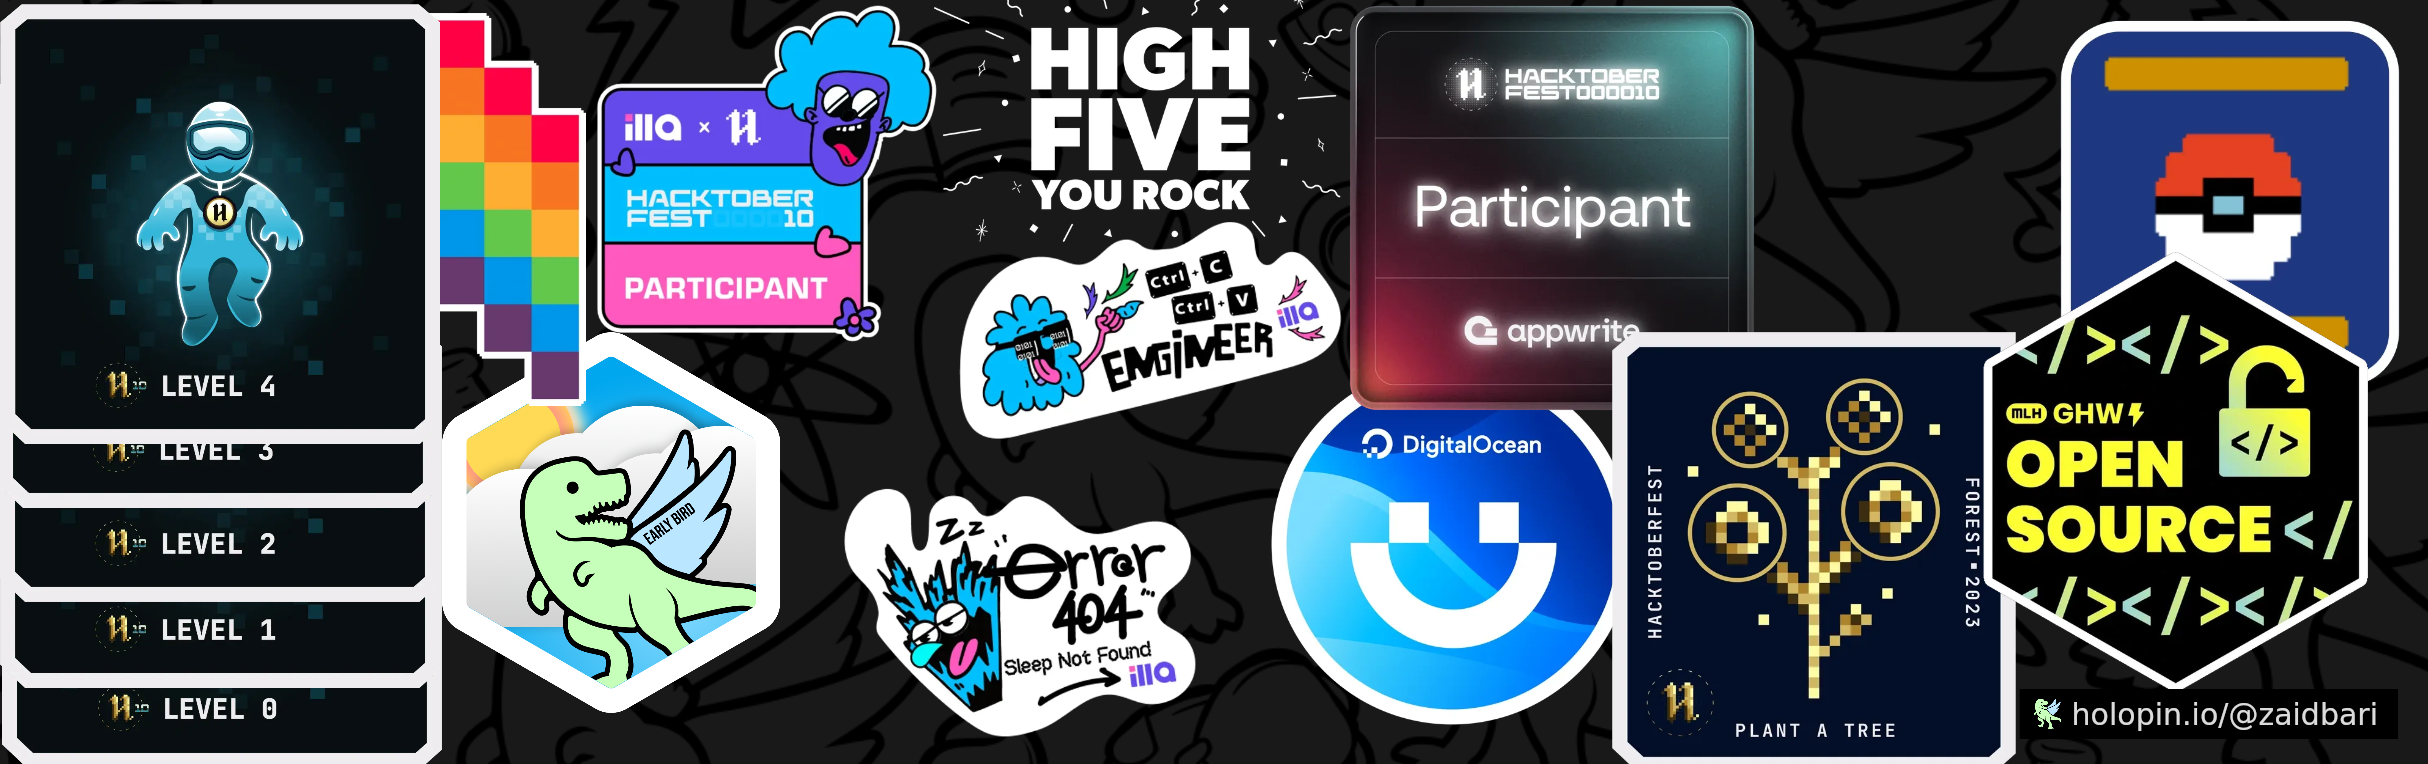 An image of @zaidbari's Holopin badges, which is a link to view their full Holopin profile